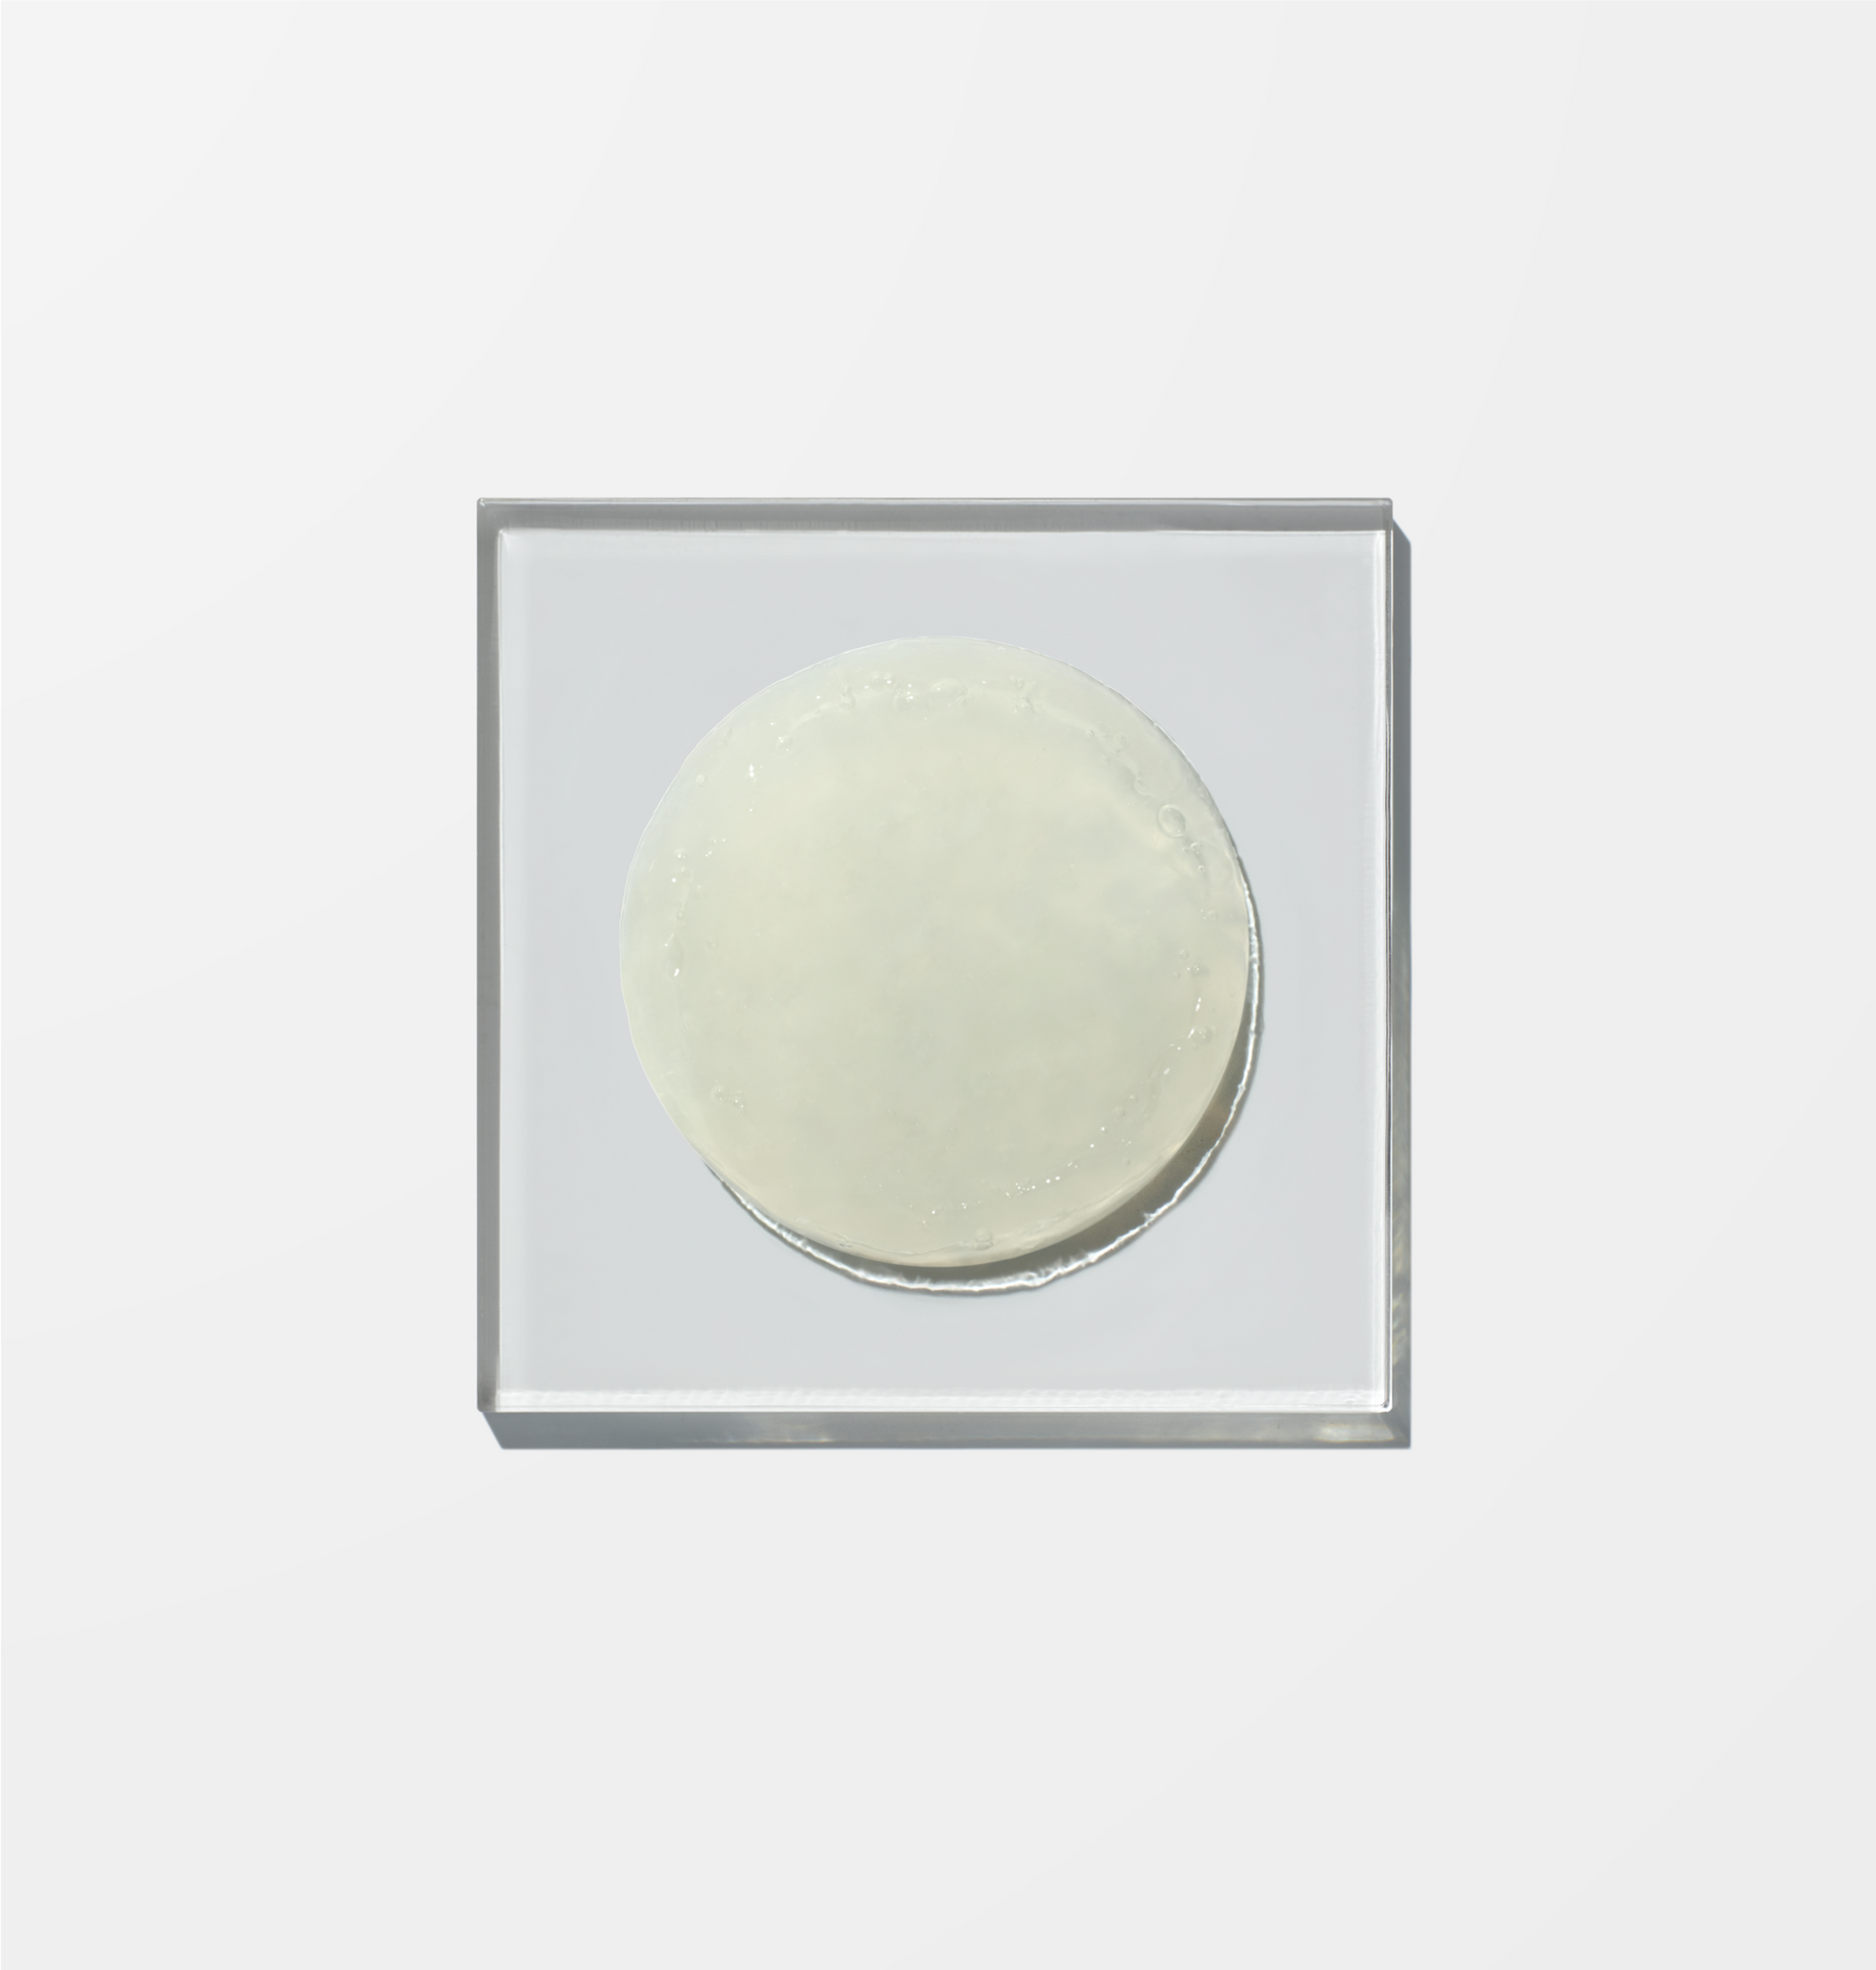 Pale yellow and slightly transparent Ingredients Wellness Face Cleanser on a glass plate